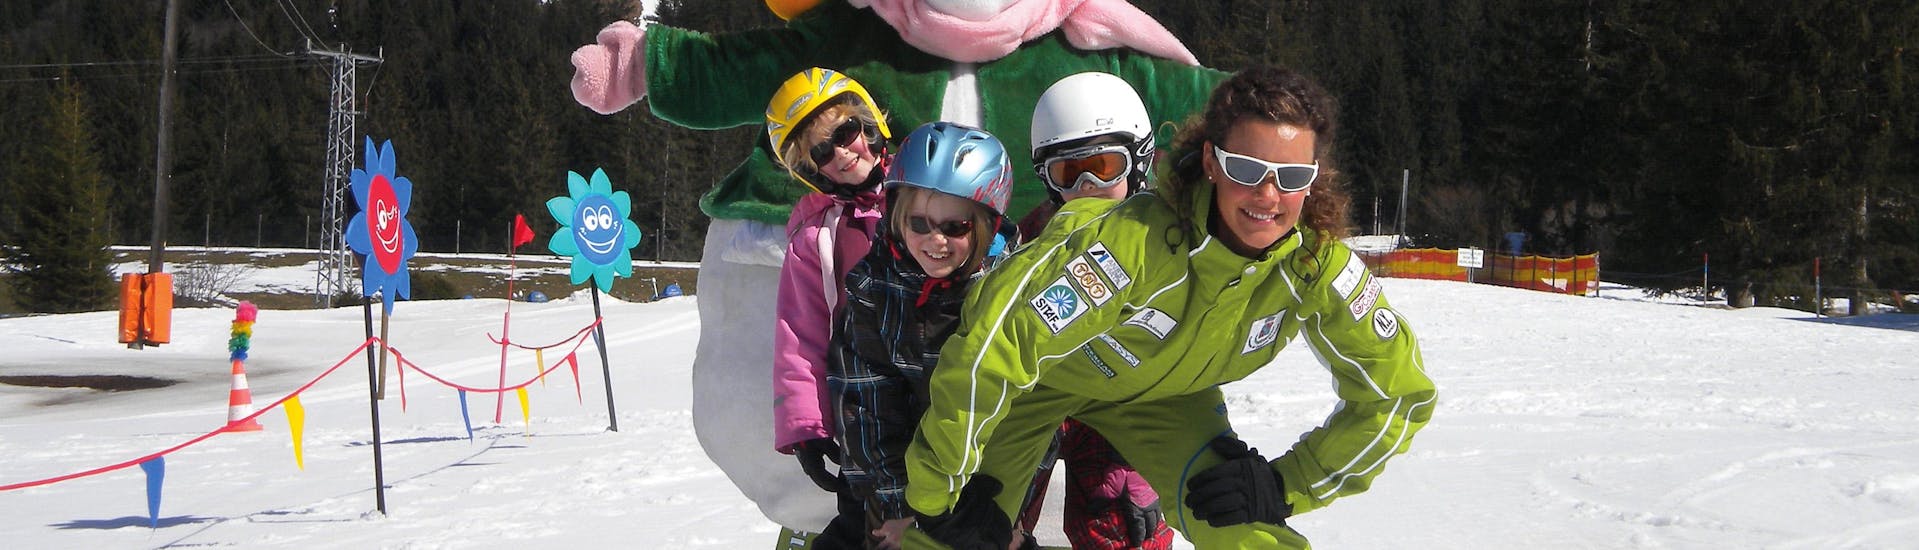 Children are having fun during skis ski lessons for all levels half day with ski school club Alpin in Grän.